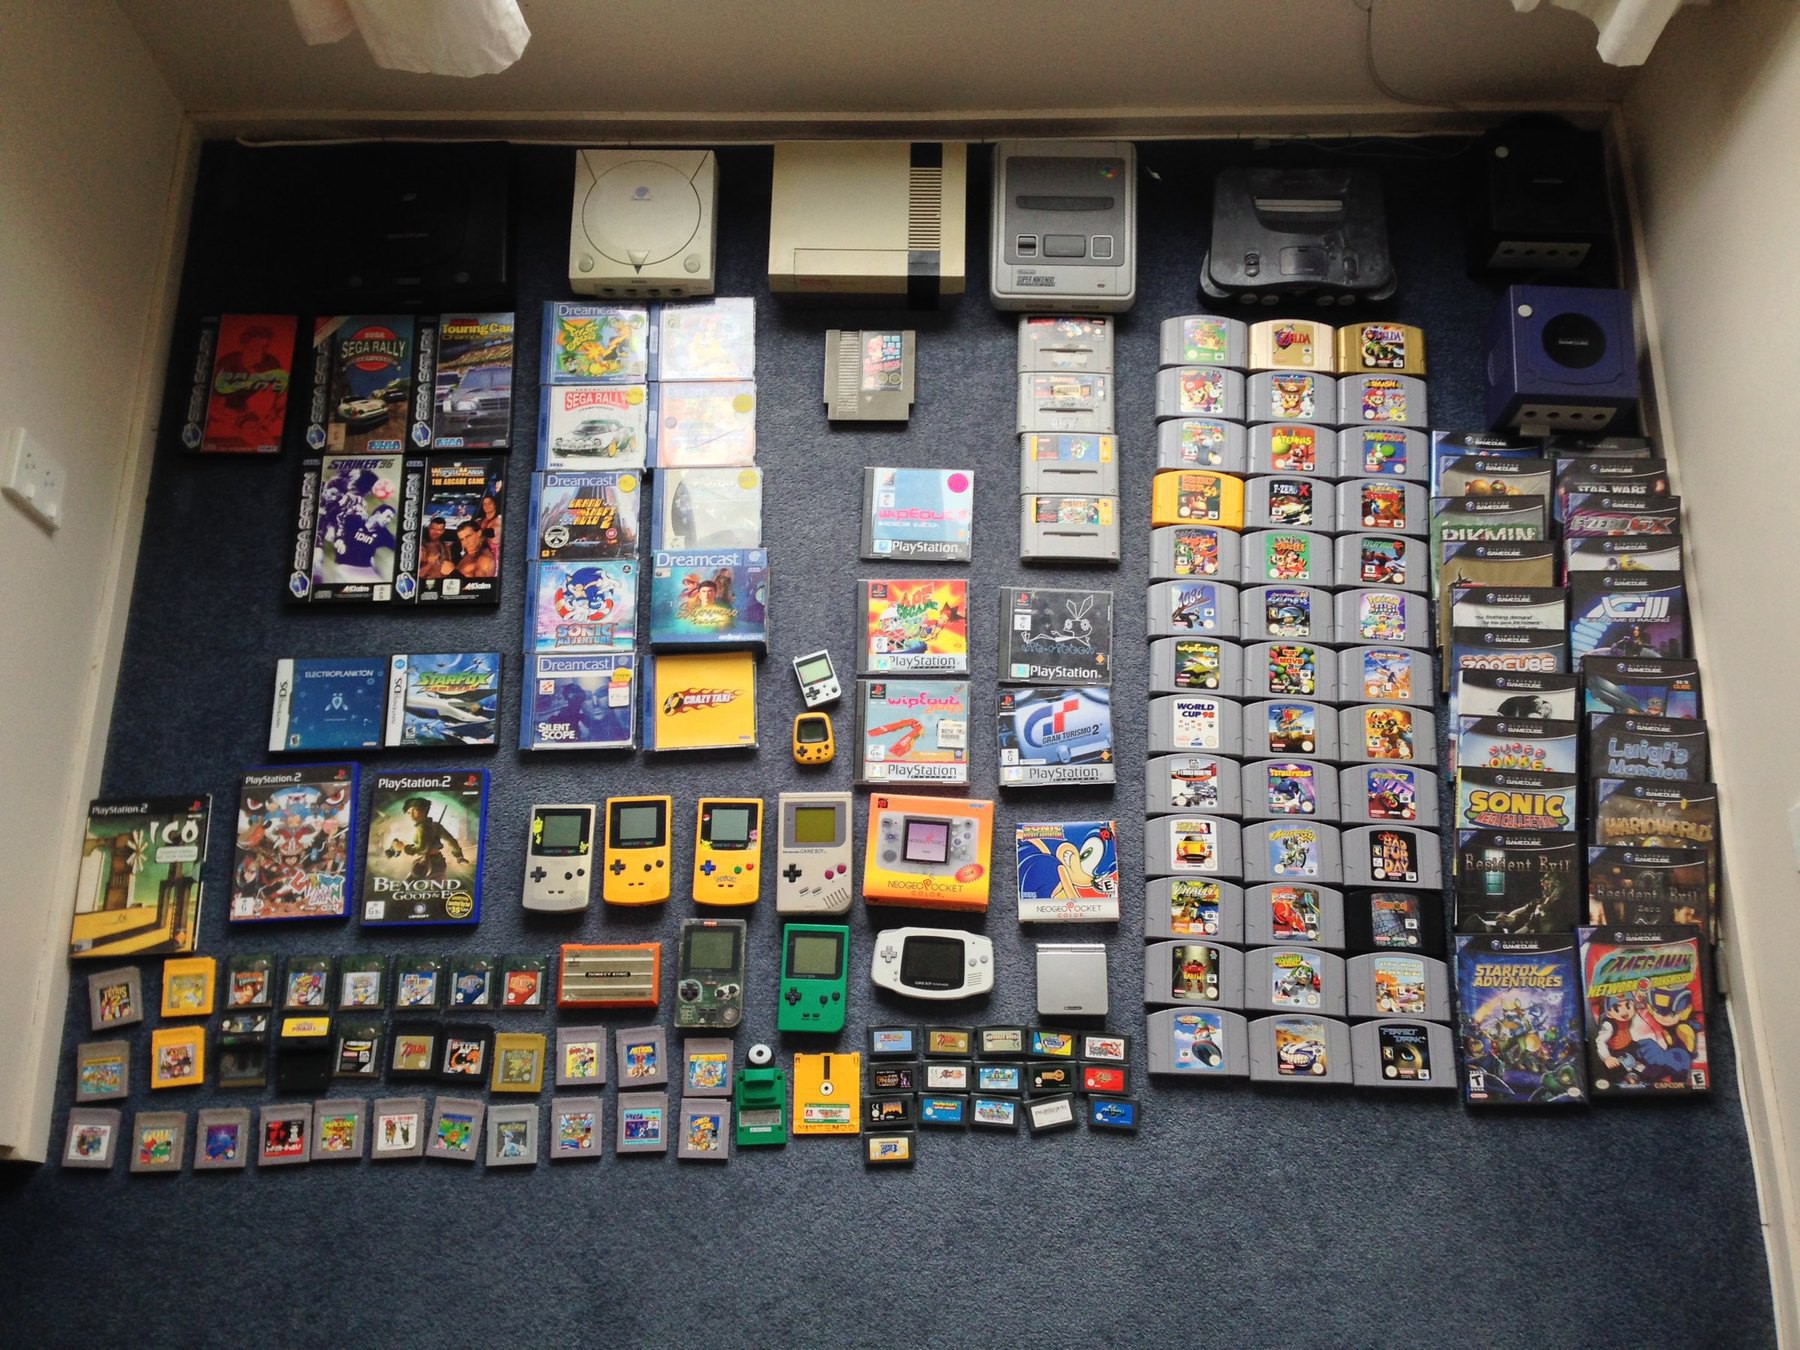 My video game collection at its peak. 7 game consoles, 12 handhelds and around 130 games. 